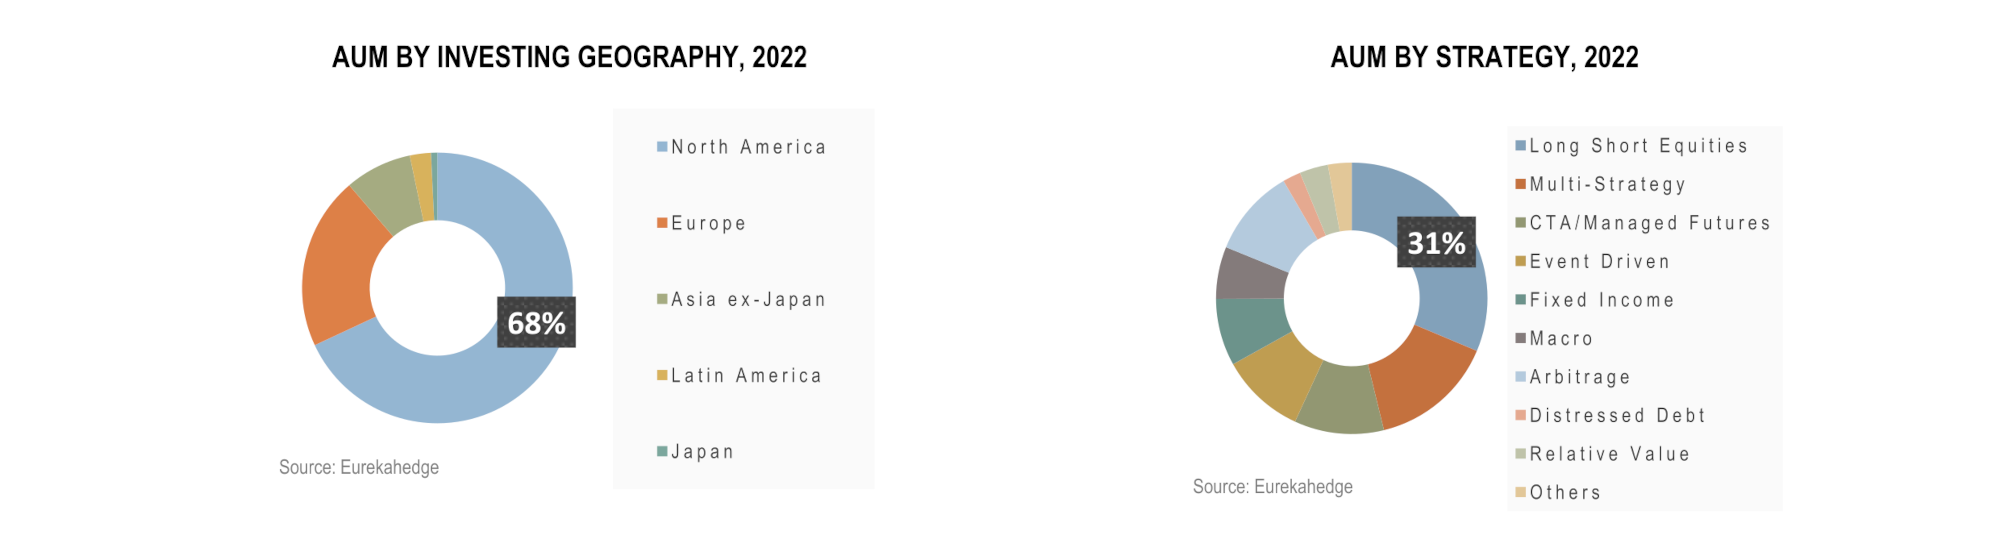 Global Hedge Funds Infographic April 2022 - AUM by investing Geography